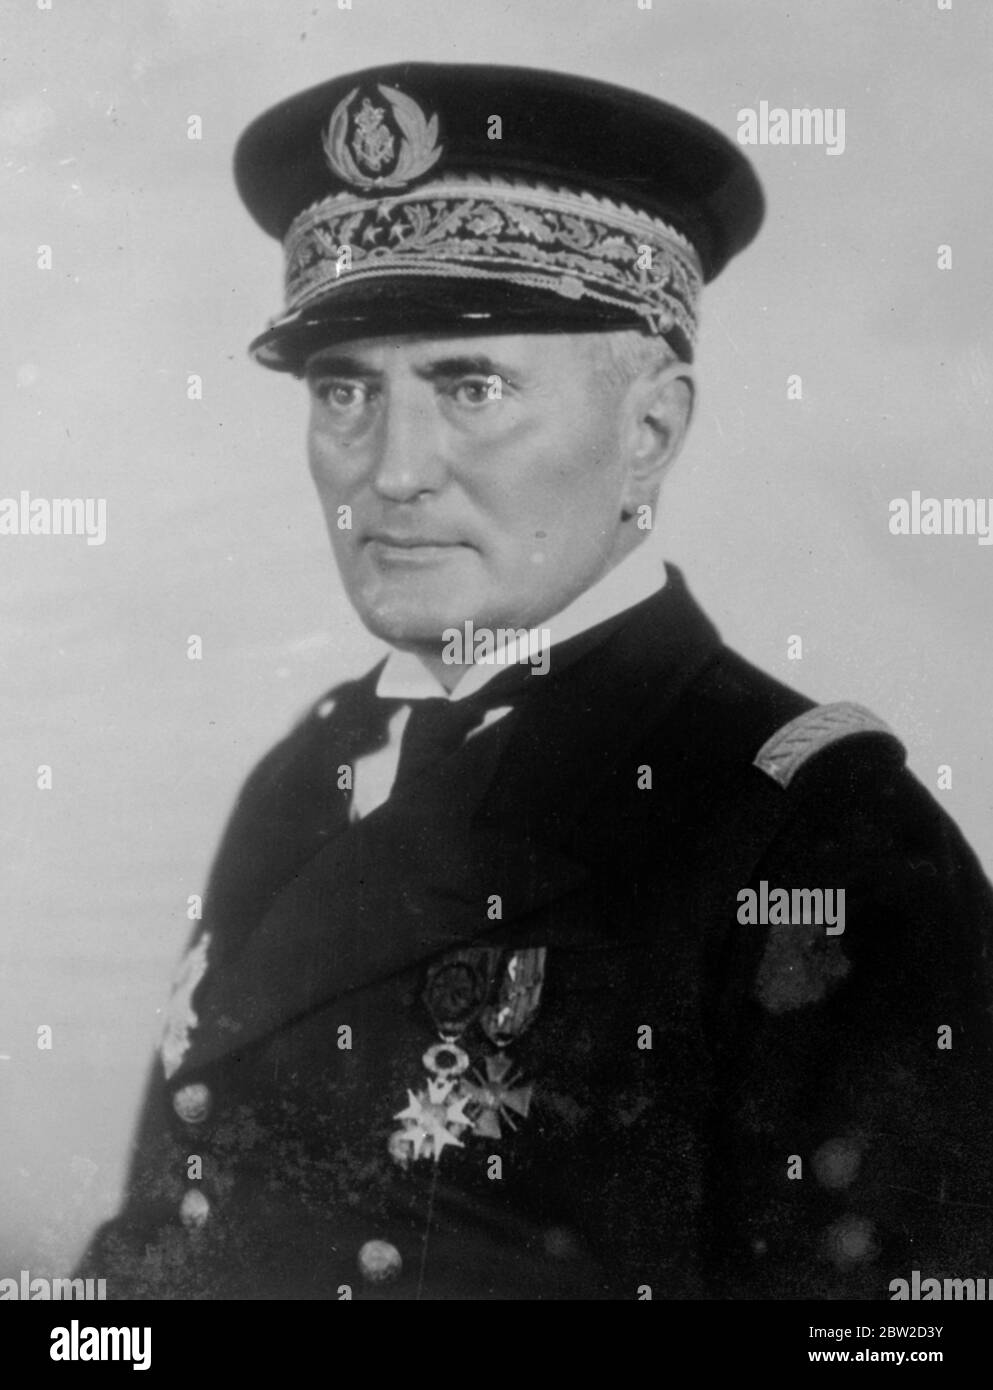 Now raised to Admiral of the Fleet, a rank that has not existed since 1870, Vice Admiral Francois Darlan assumed supreme command of the French Naval Forces. Photo shows: Admiral of the Fleet, Darlan. 29 June 1939 Stock Photo